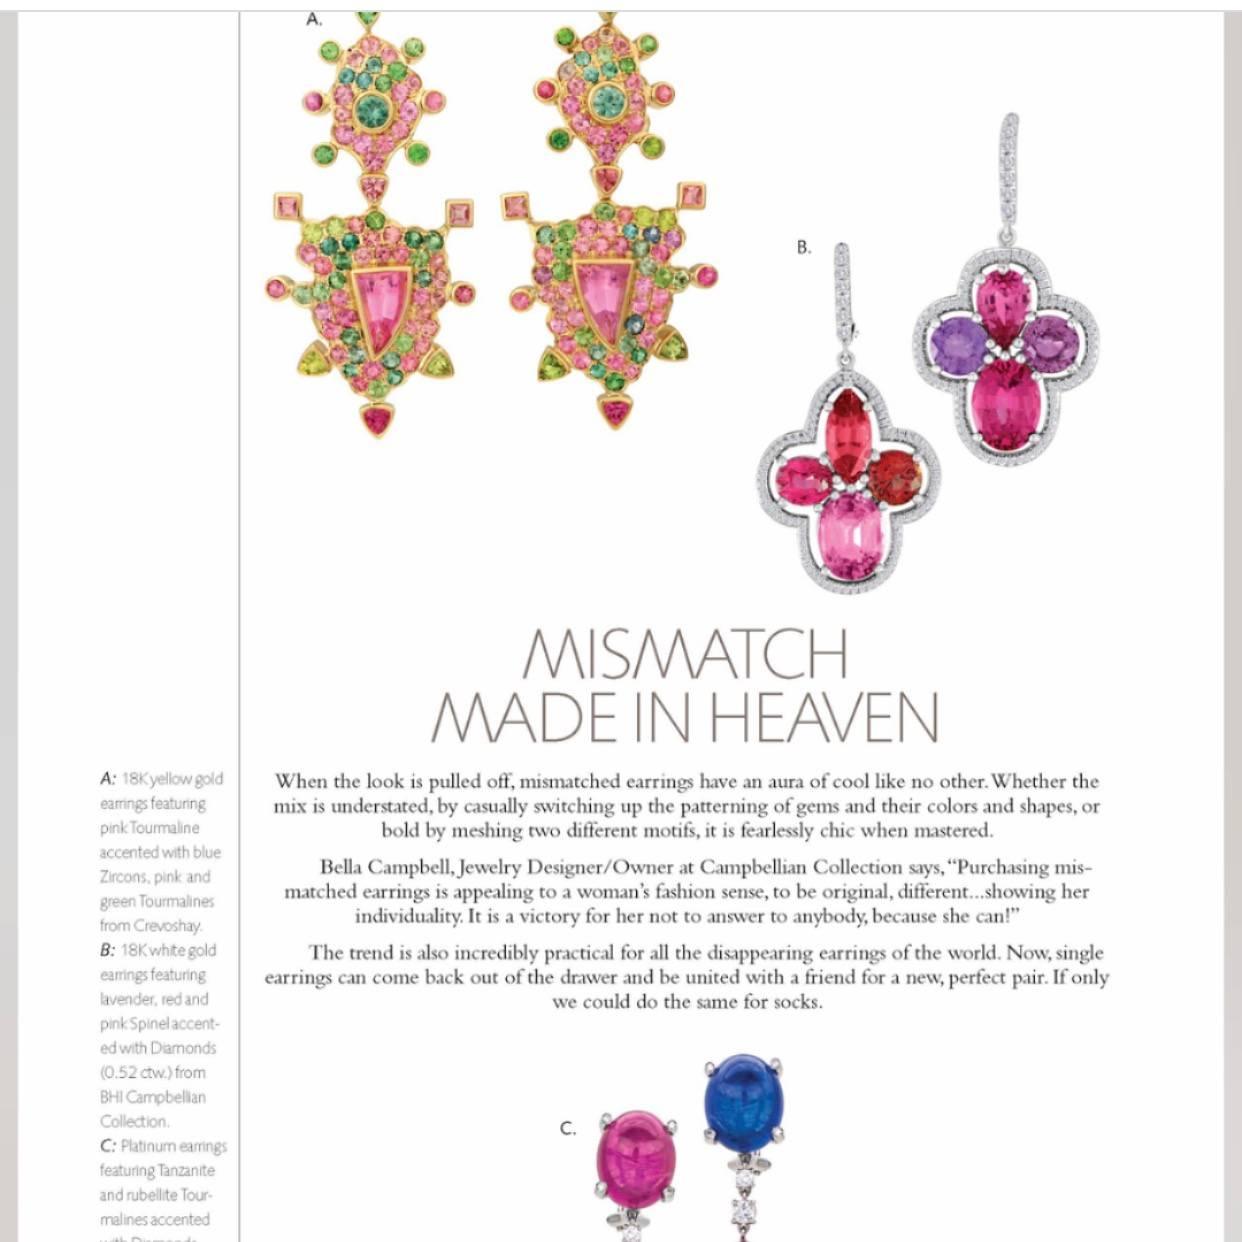 The Spectacular Miss Match Earrings with: Red, Pink , Neon Pink Spinels mixed with Pink, Lavender and Purple Sapphires,with Combinations of Various Shapes makes these Earrings truly Dramatic example of Contemporary Fine Jewelry.
Accented with